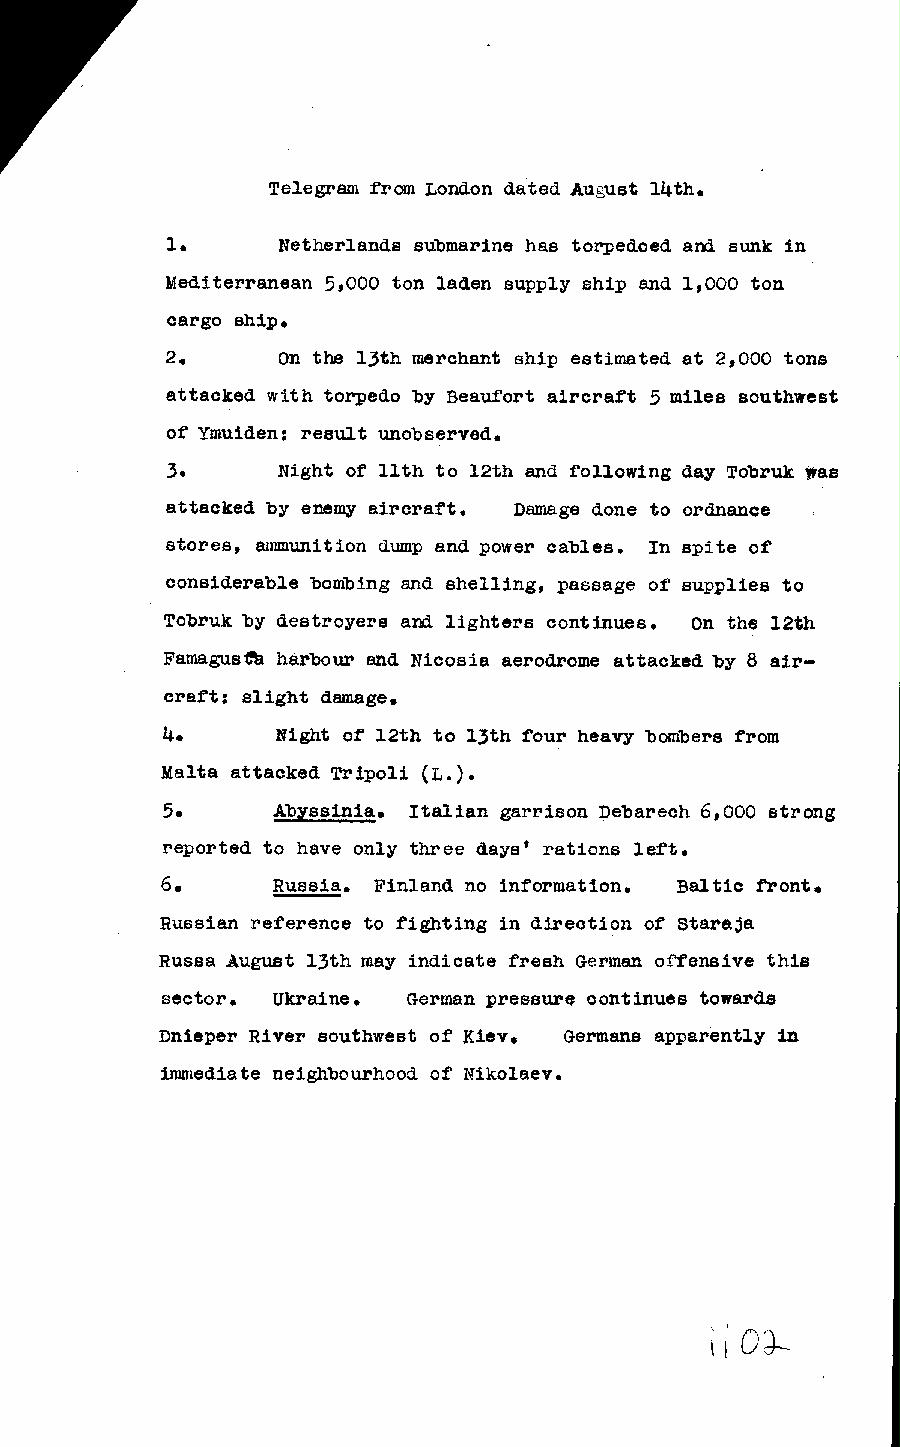 [a322ii02.jpg] - Report on military situation 8/14/41